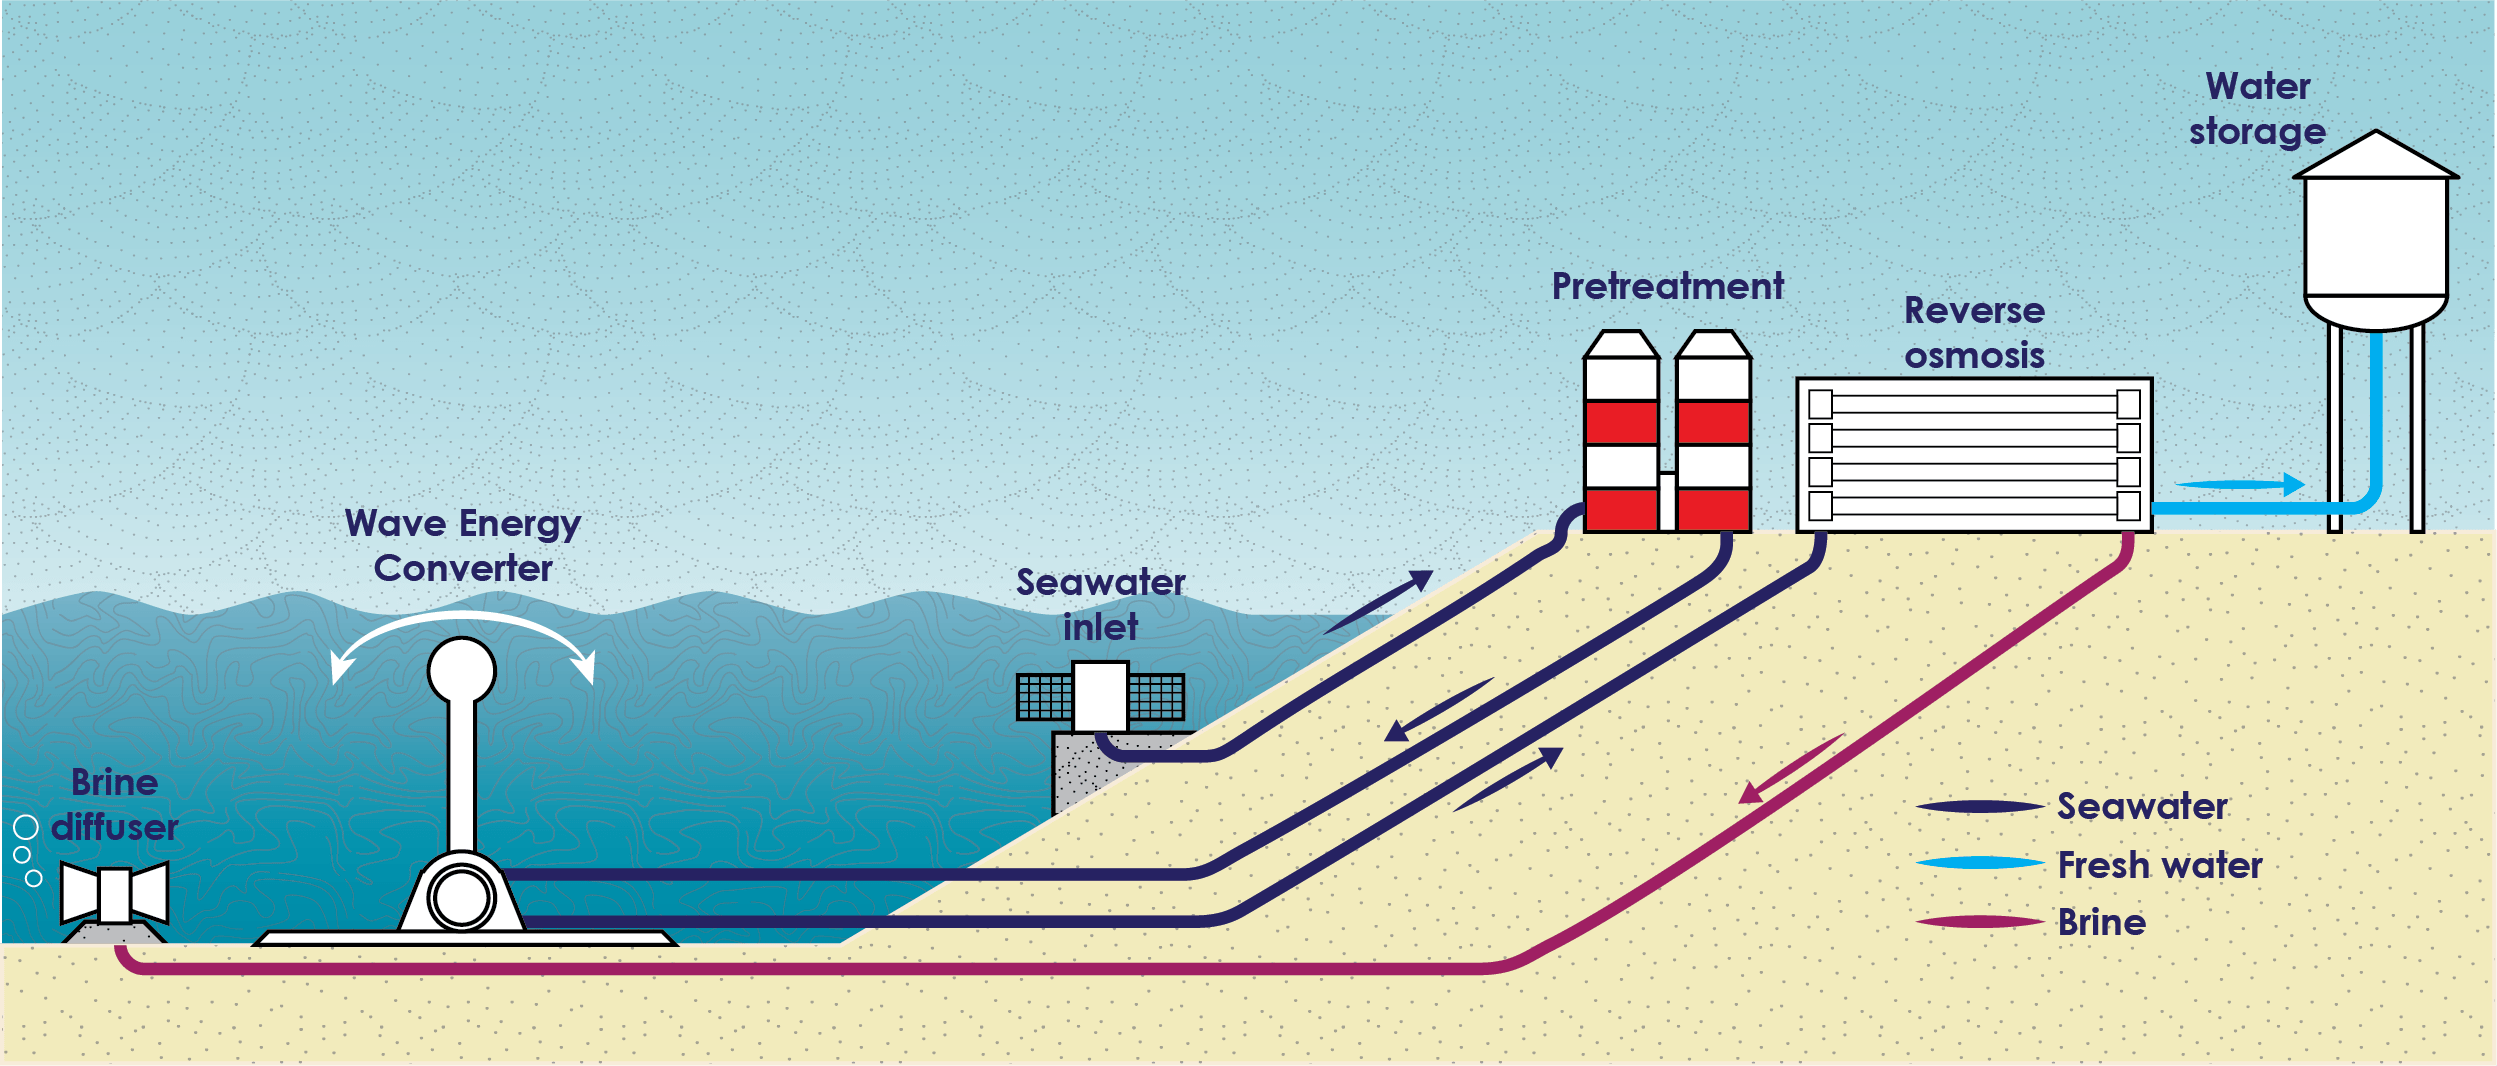 Wave-powered desalination – a cheaper alternative for water security?